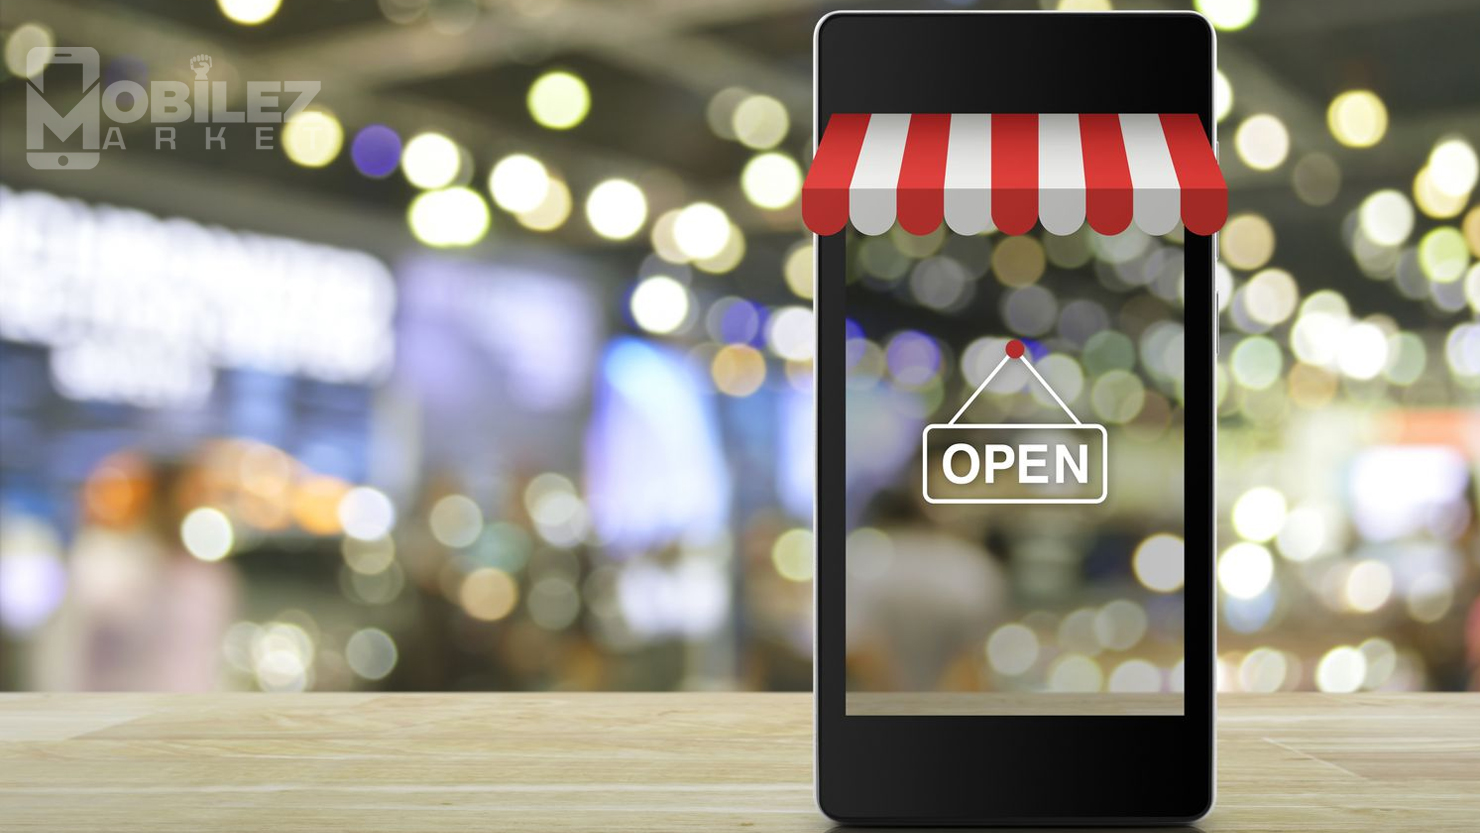 The Benefits of Using Mobile Marketplaces for Buying and Selling Used Goods